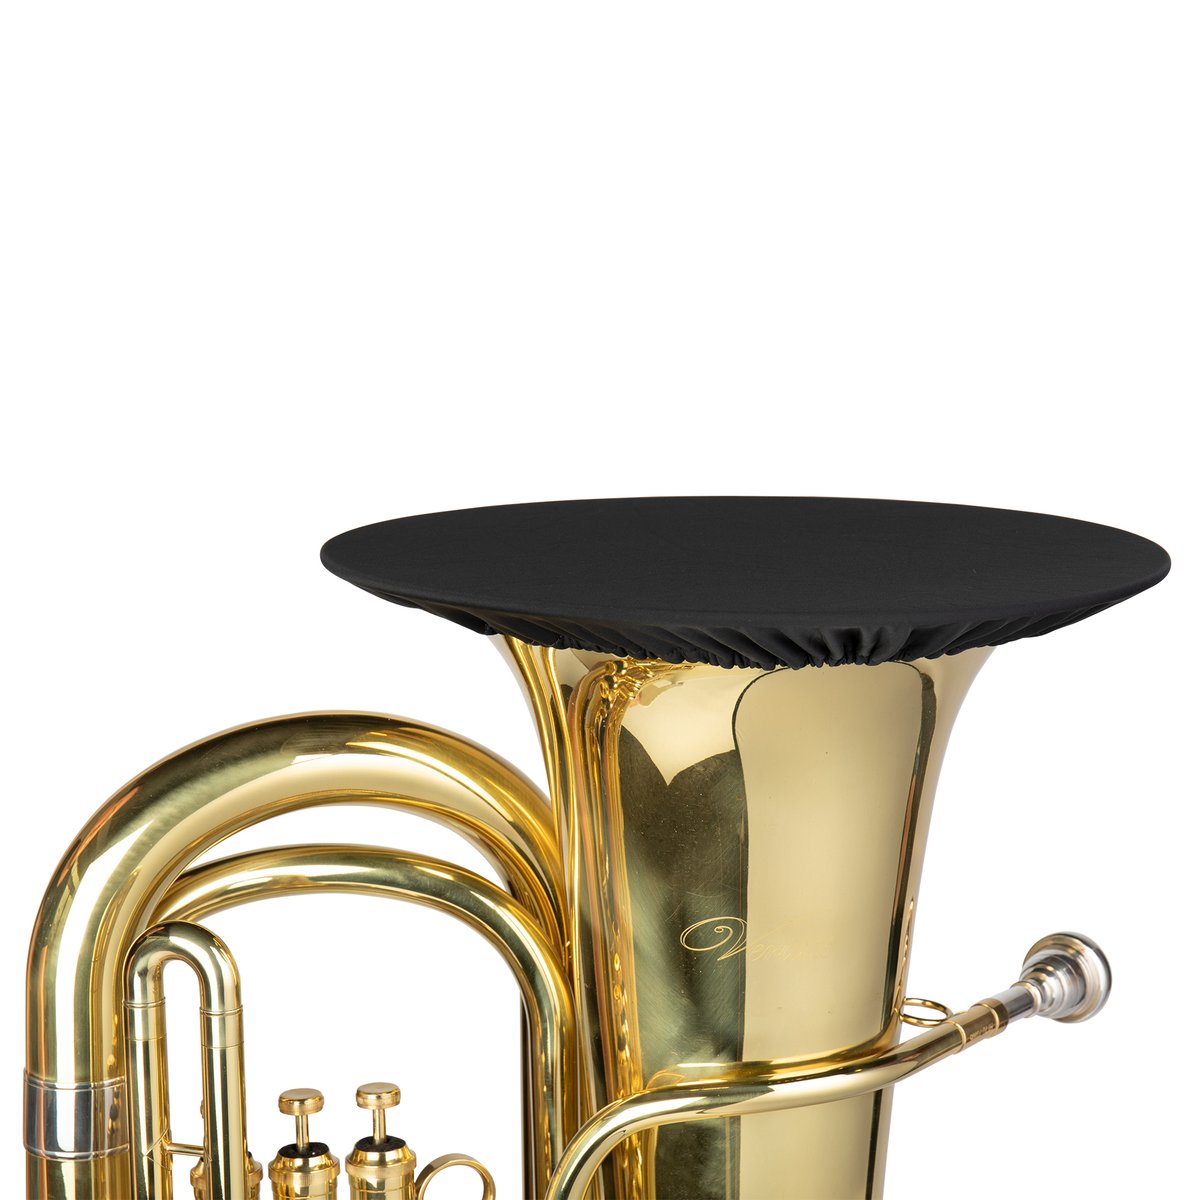 Double-Layer Wind Instrument Cover for Bell Sizes Ranging from 22.5 to 24.5-Inches (Black Color)